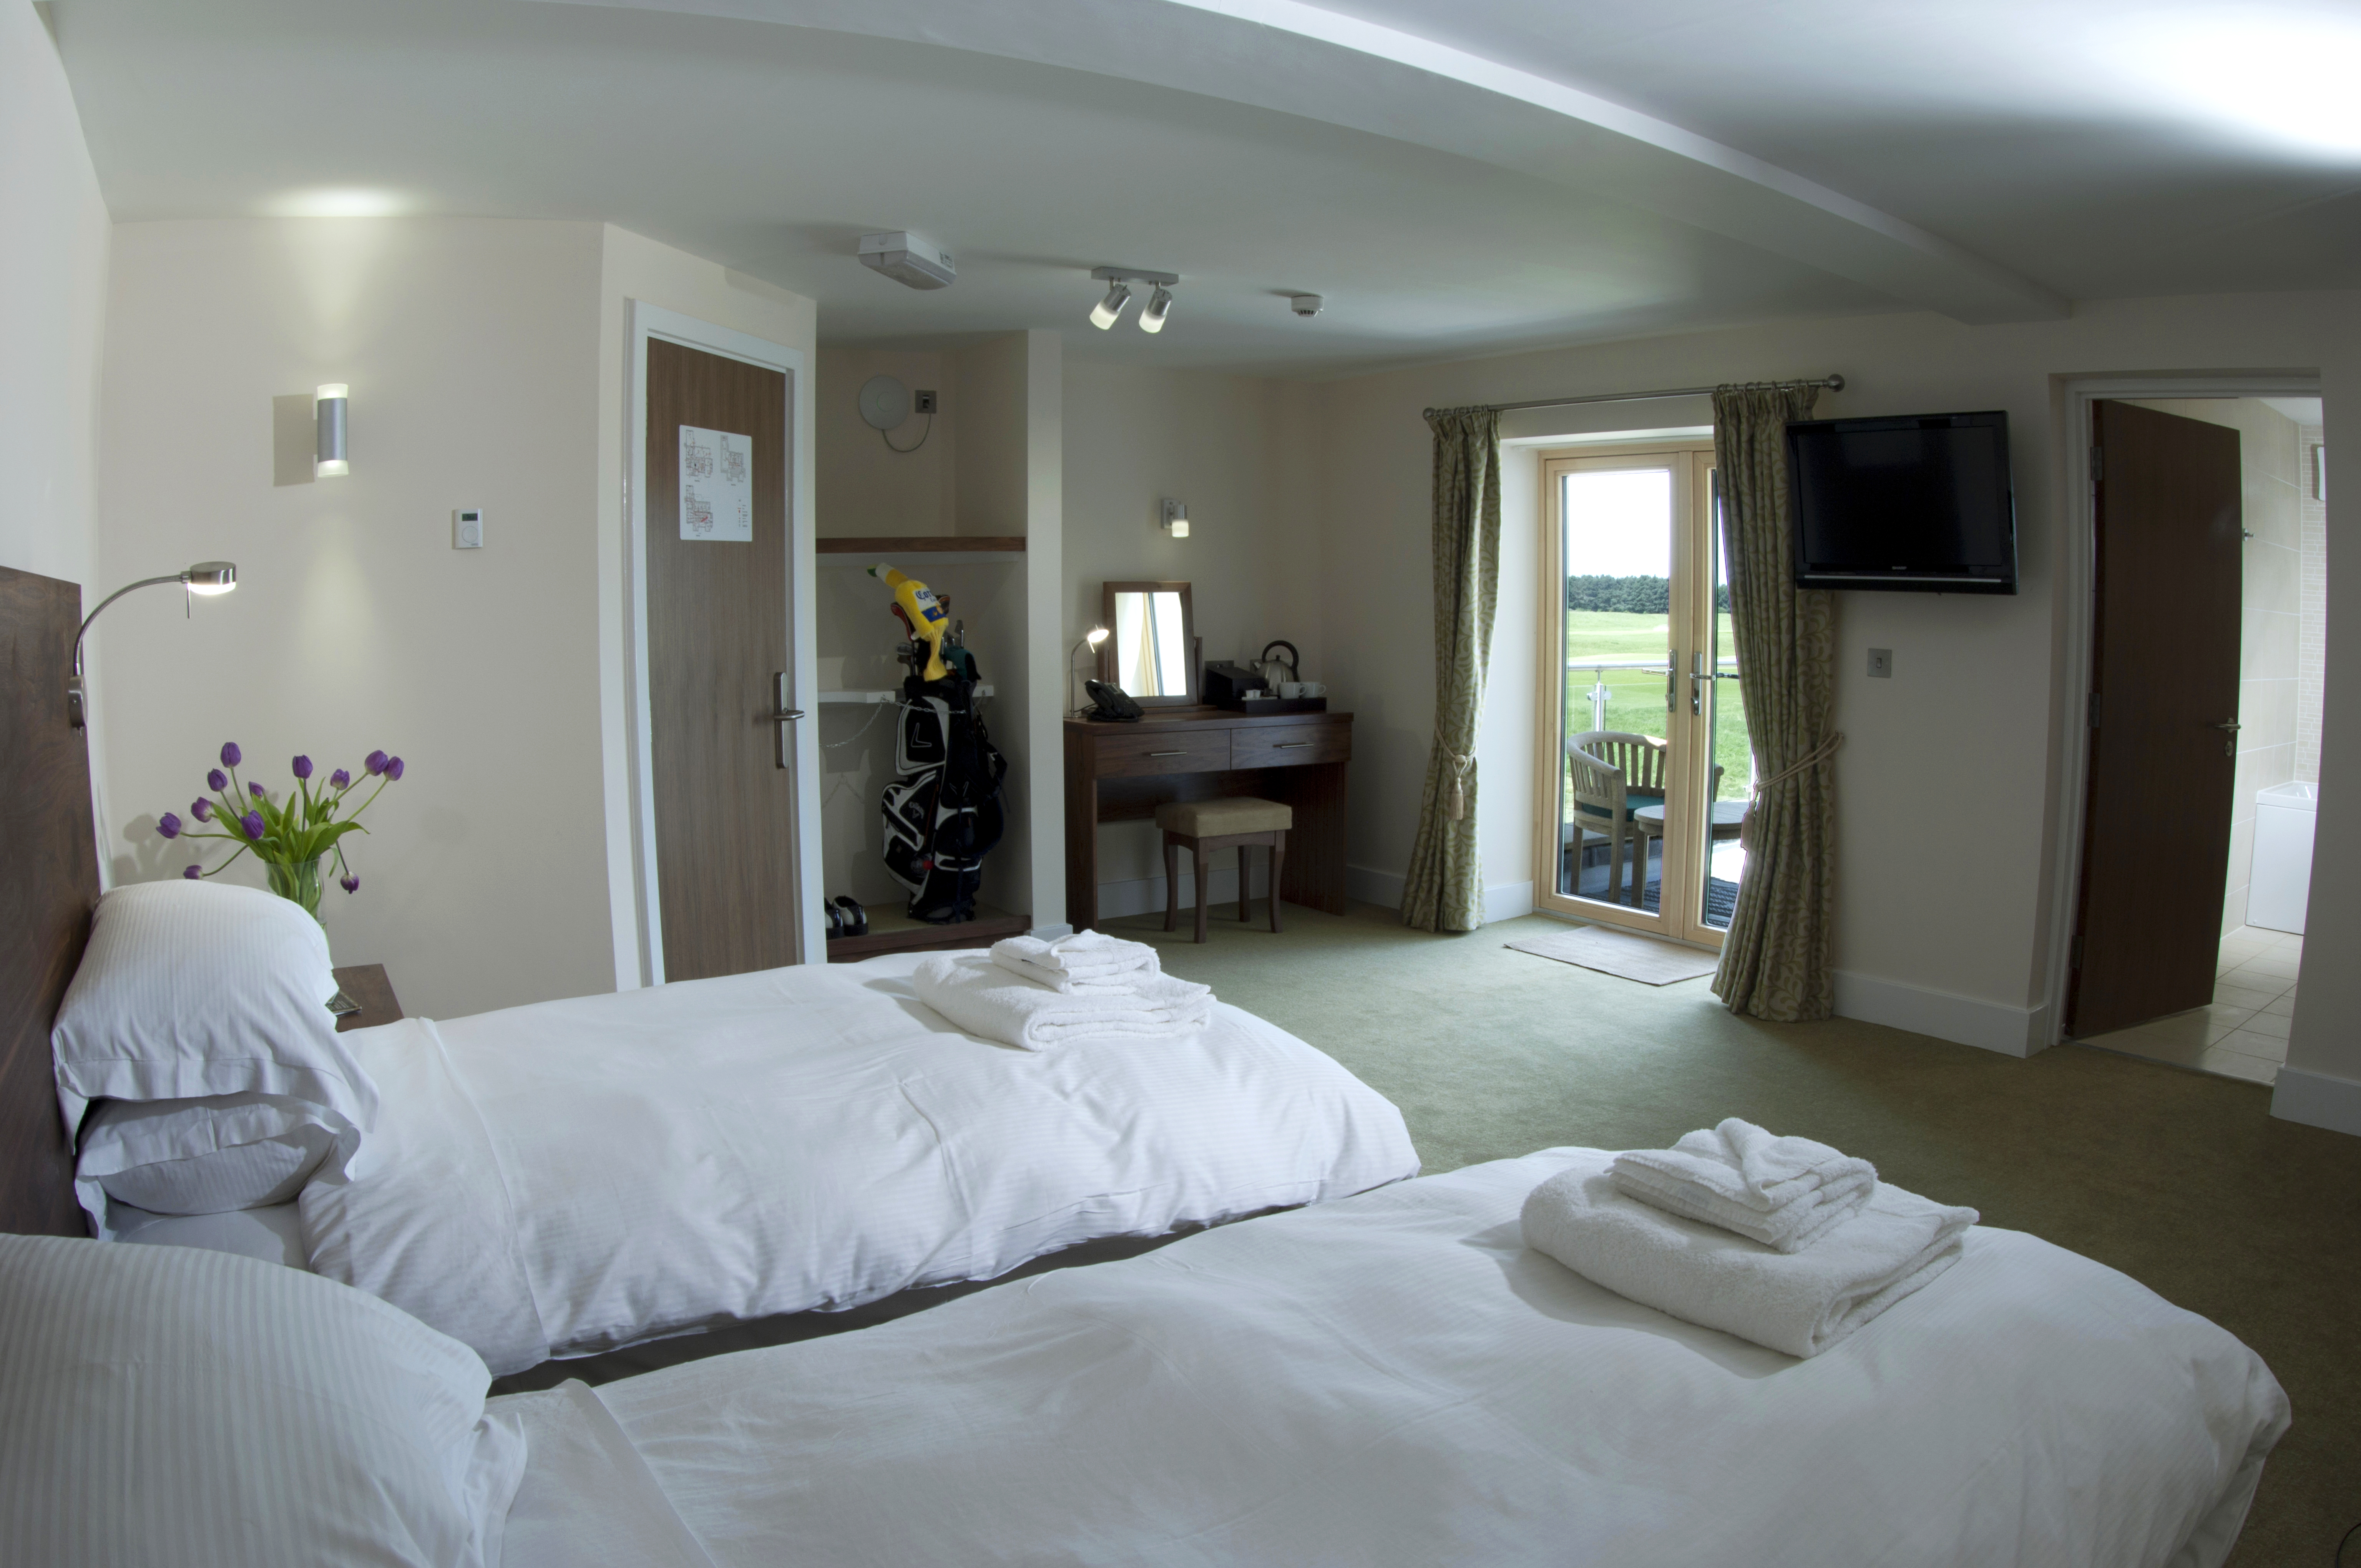 The Lodge at Prince's, Prince's Golf Club, Sandwich, accommodation, 